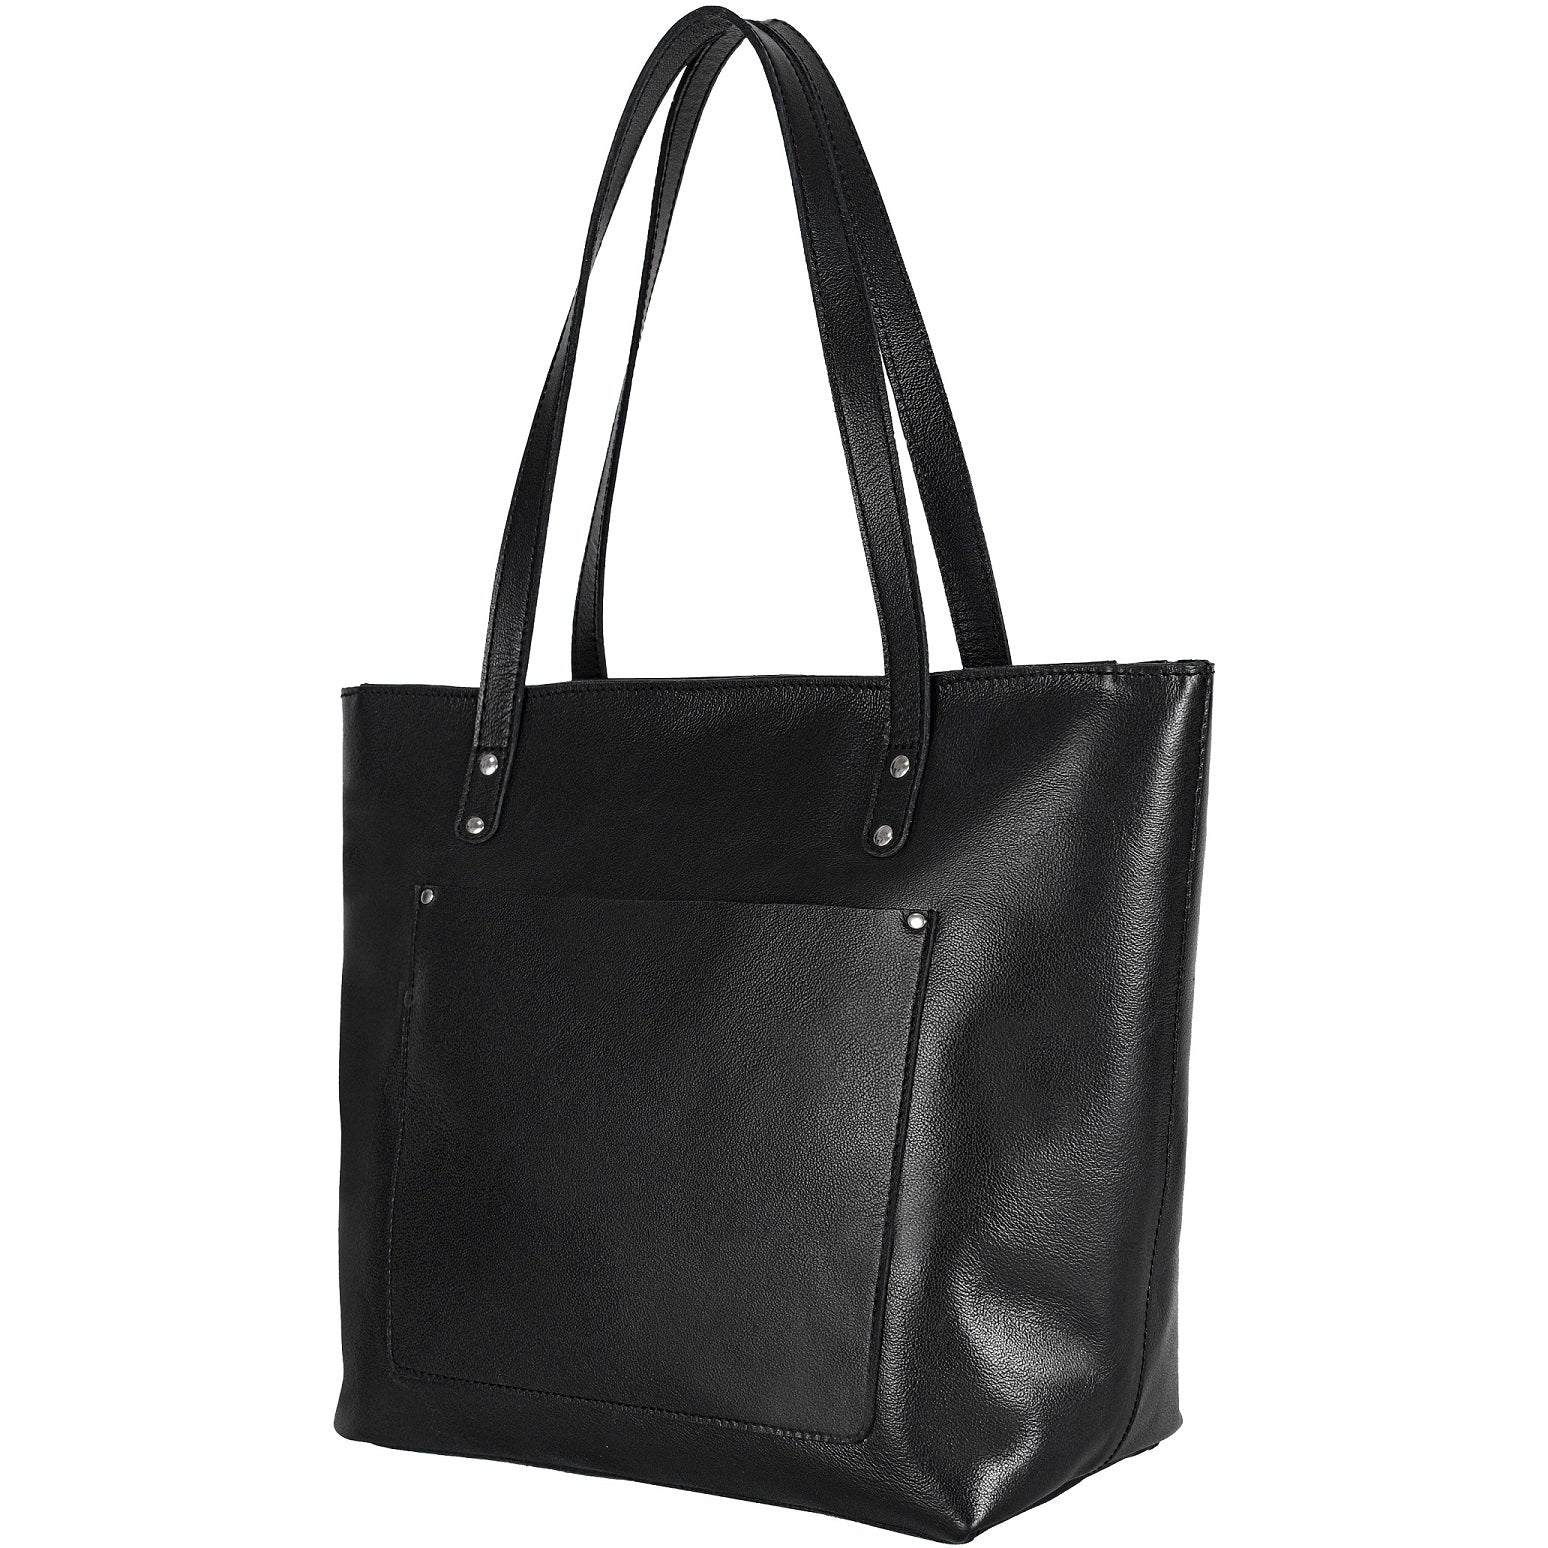 Quality Leather Tote Bags, Limitless Ways to Use